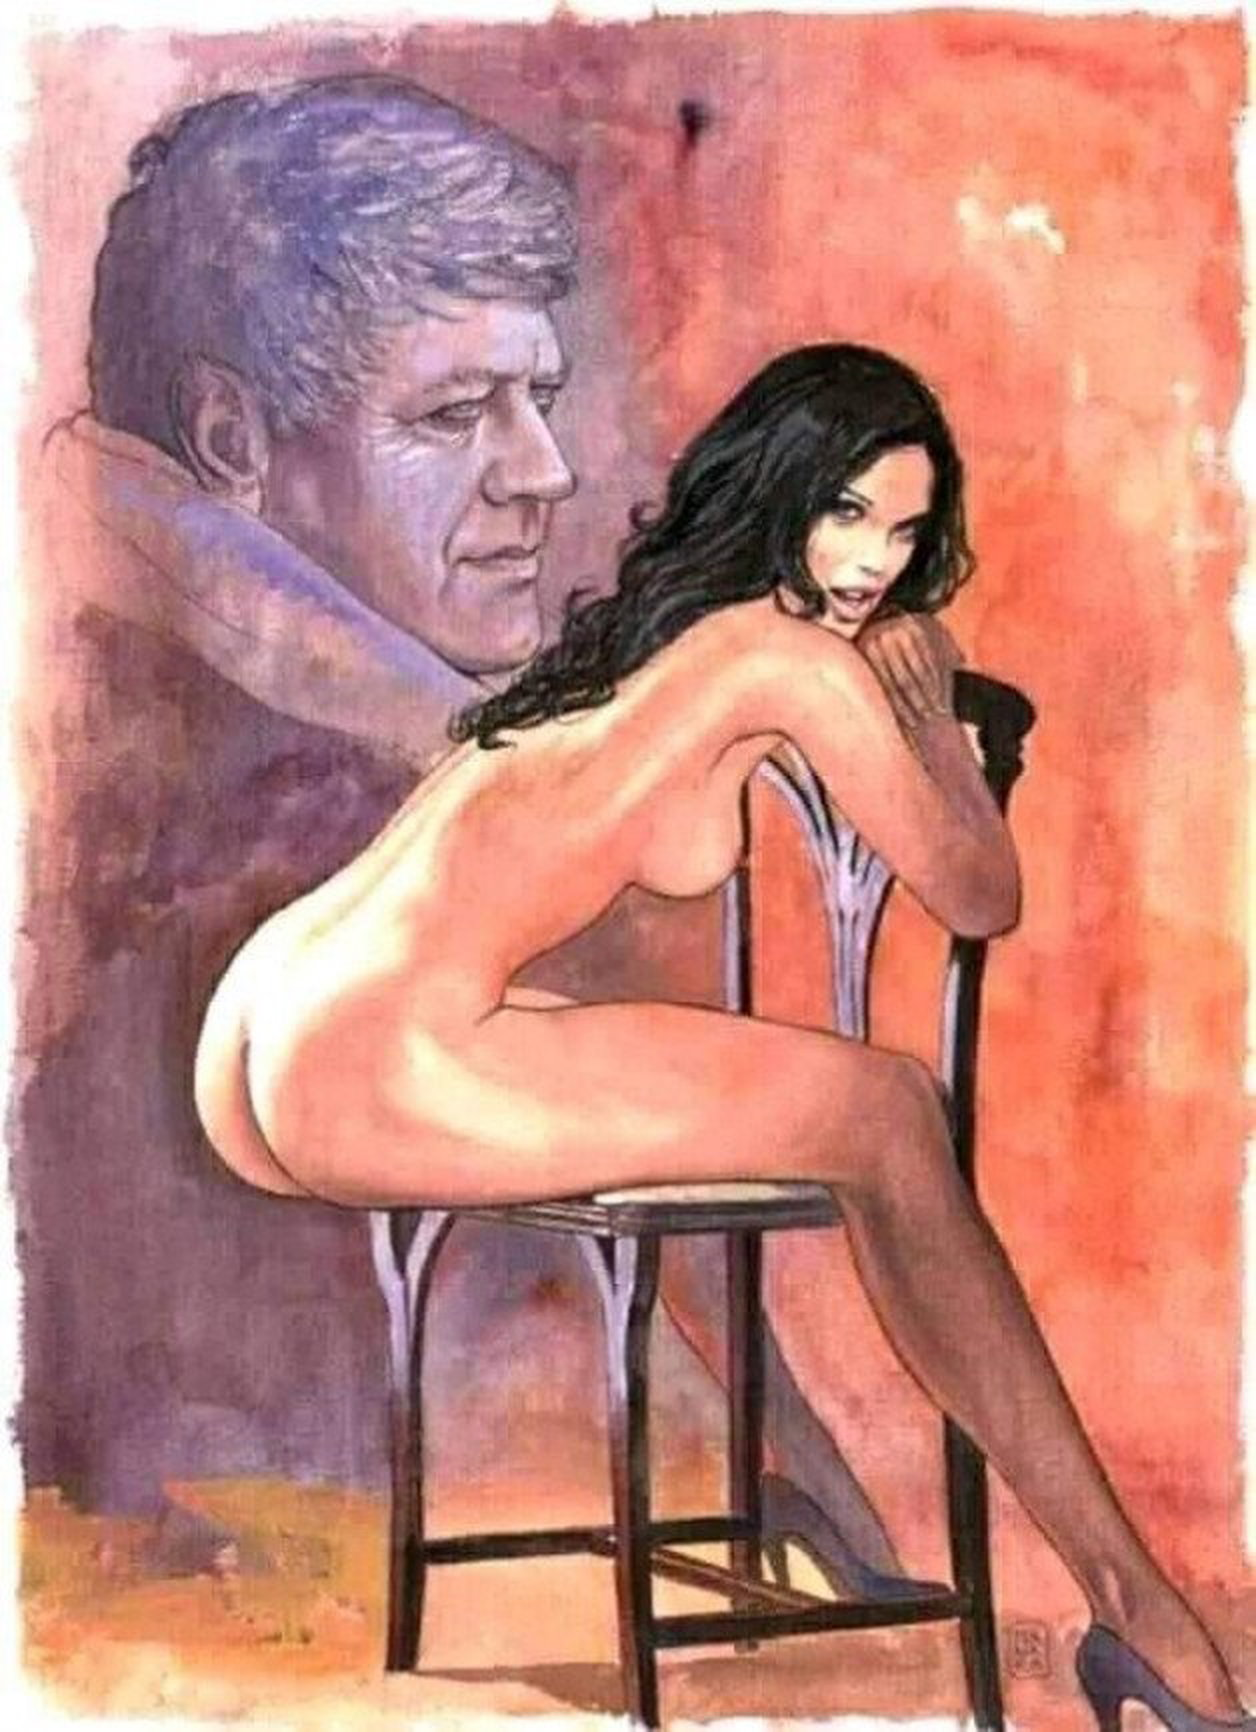 Photo by Sumles with the username @Sumles,  September 1, 2021 at 5:41 AM. The post is about the topic Erotic Cartoons and the text says 'Manara #milomanara #manara'